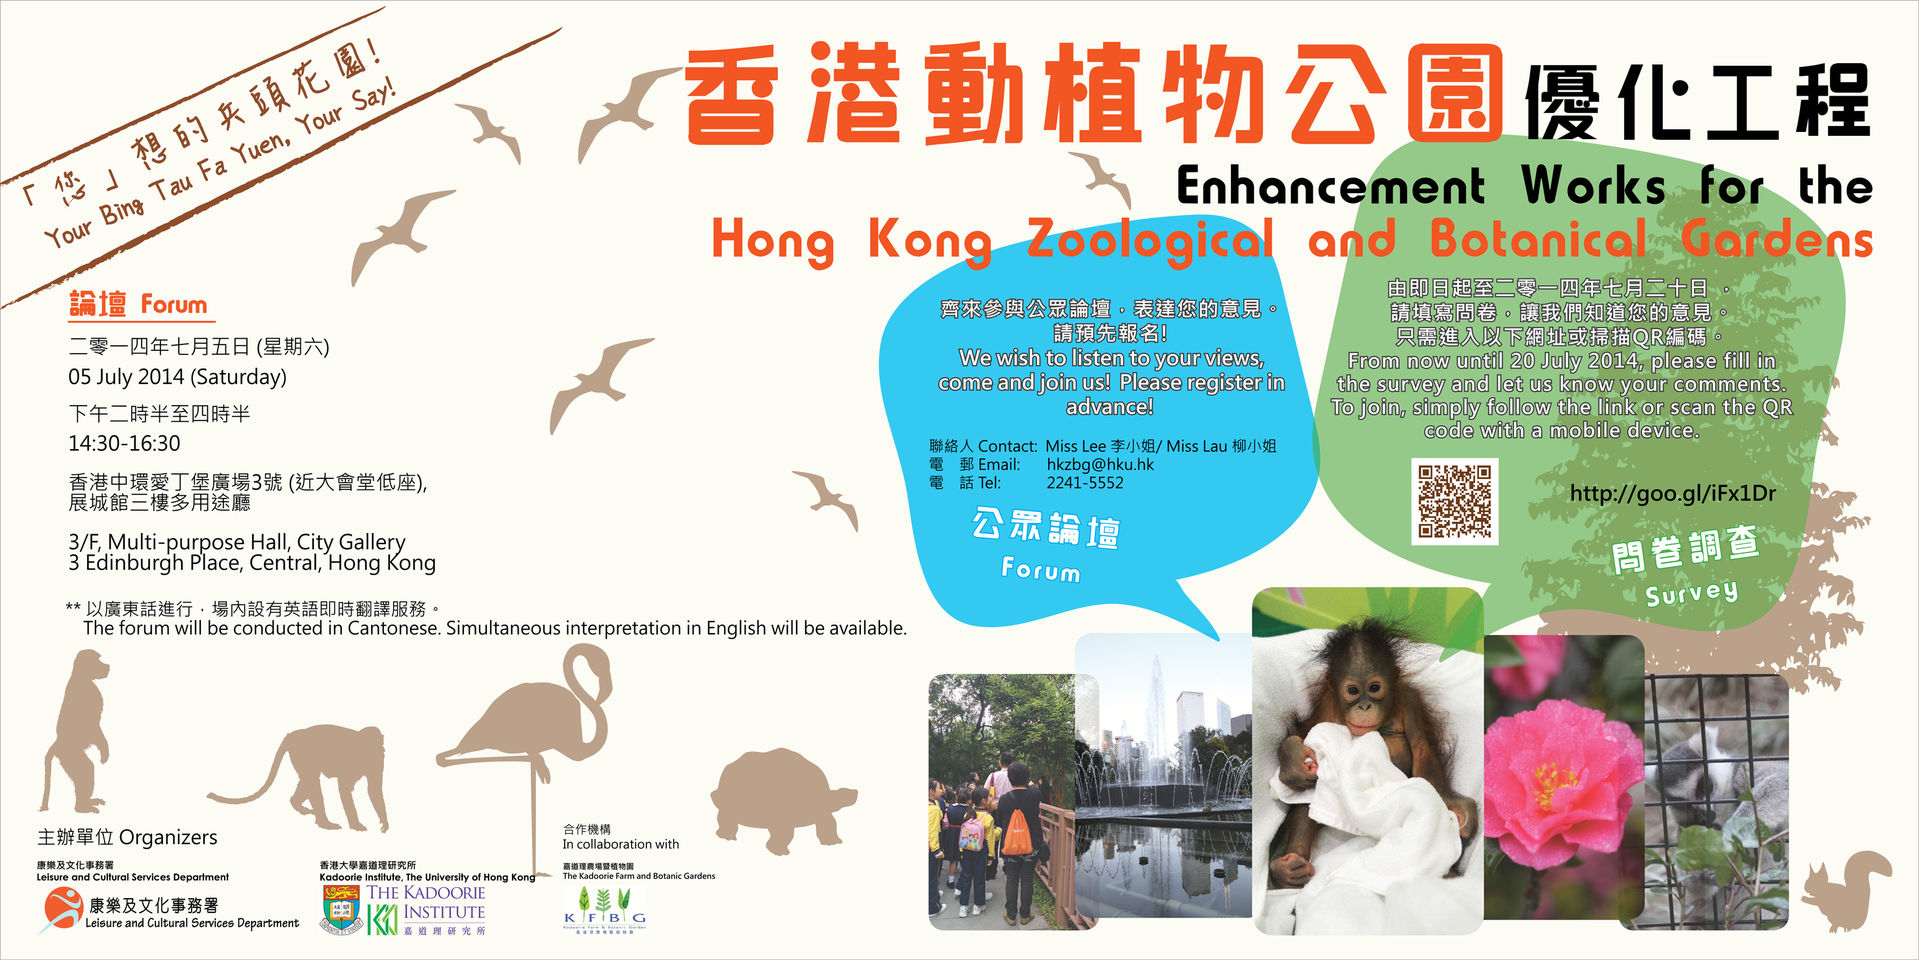 Hong Kong Zoological and Botanical Gardens Study - Please join us!